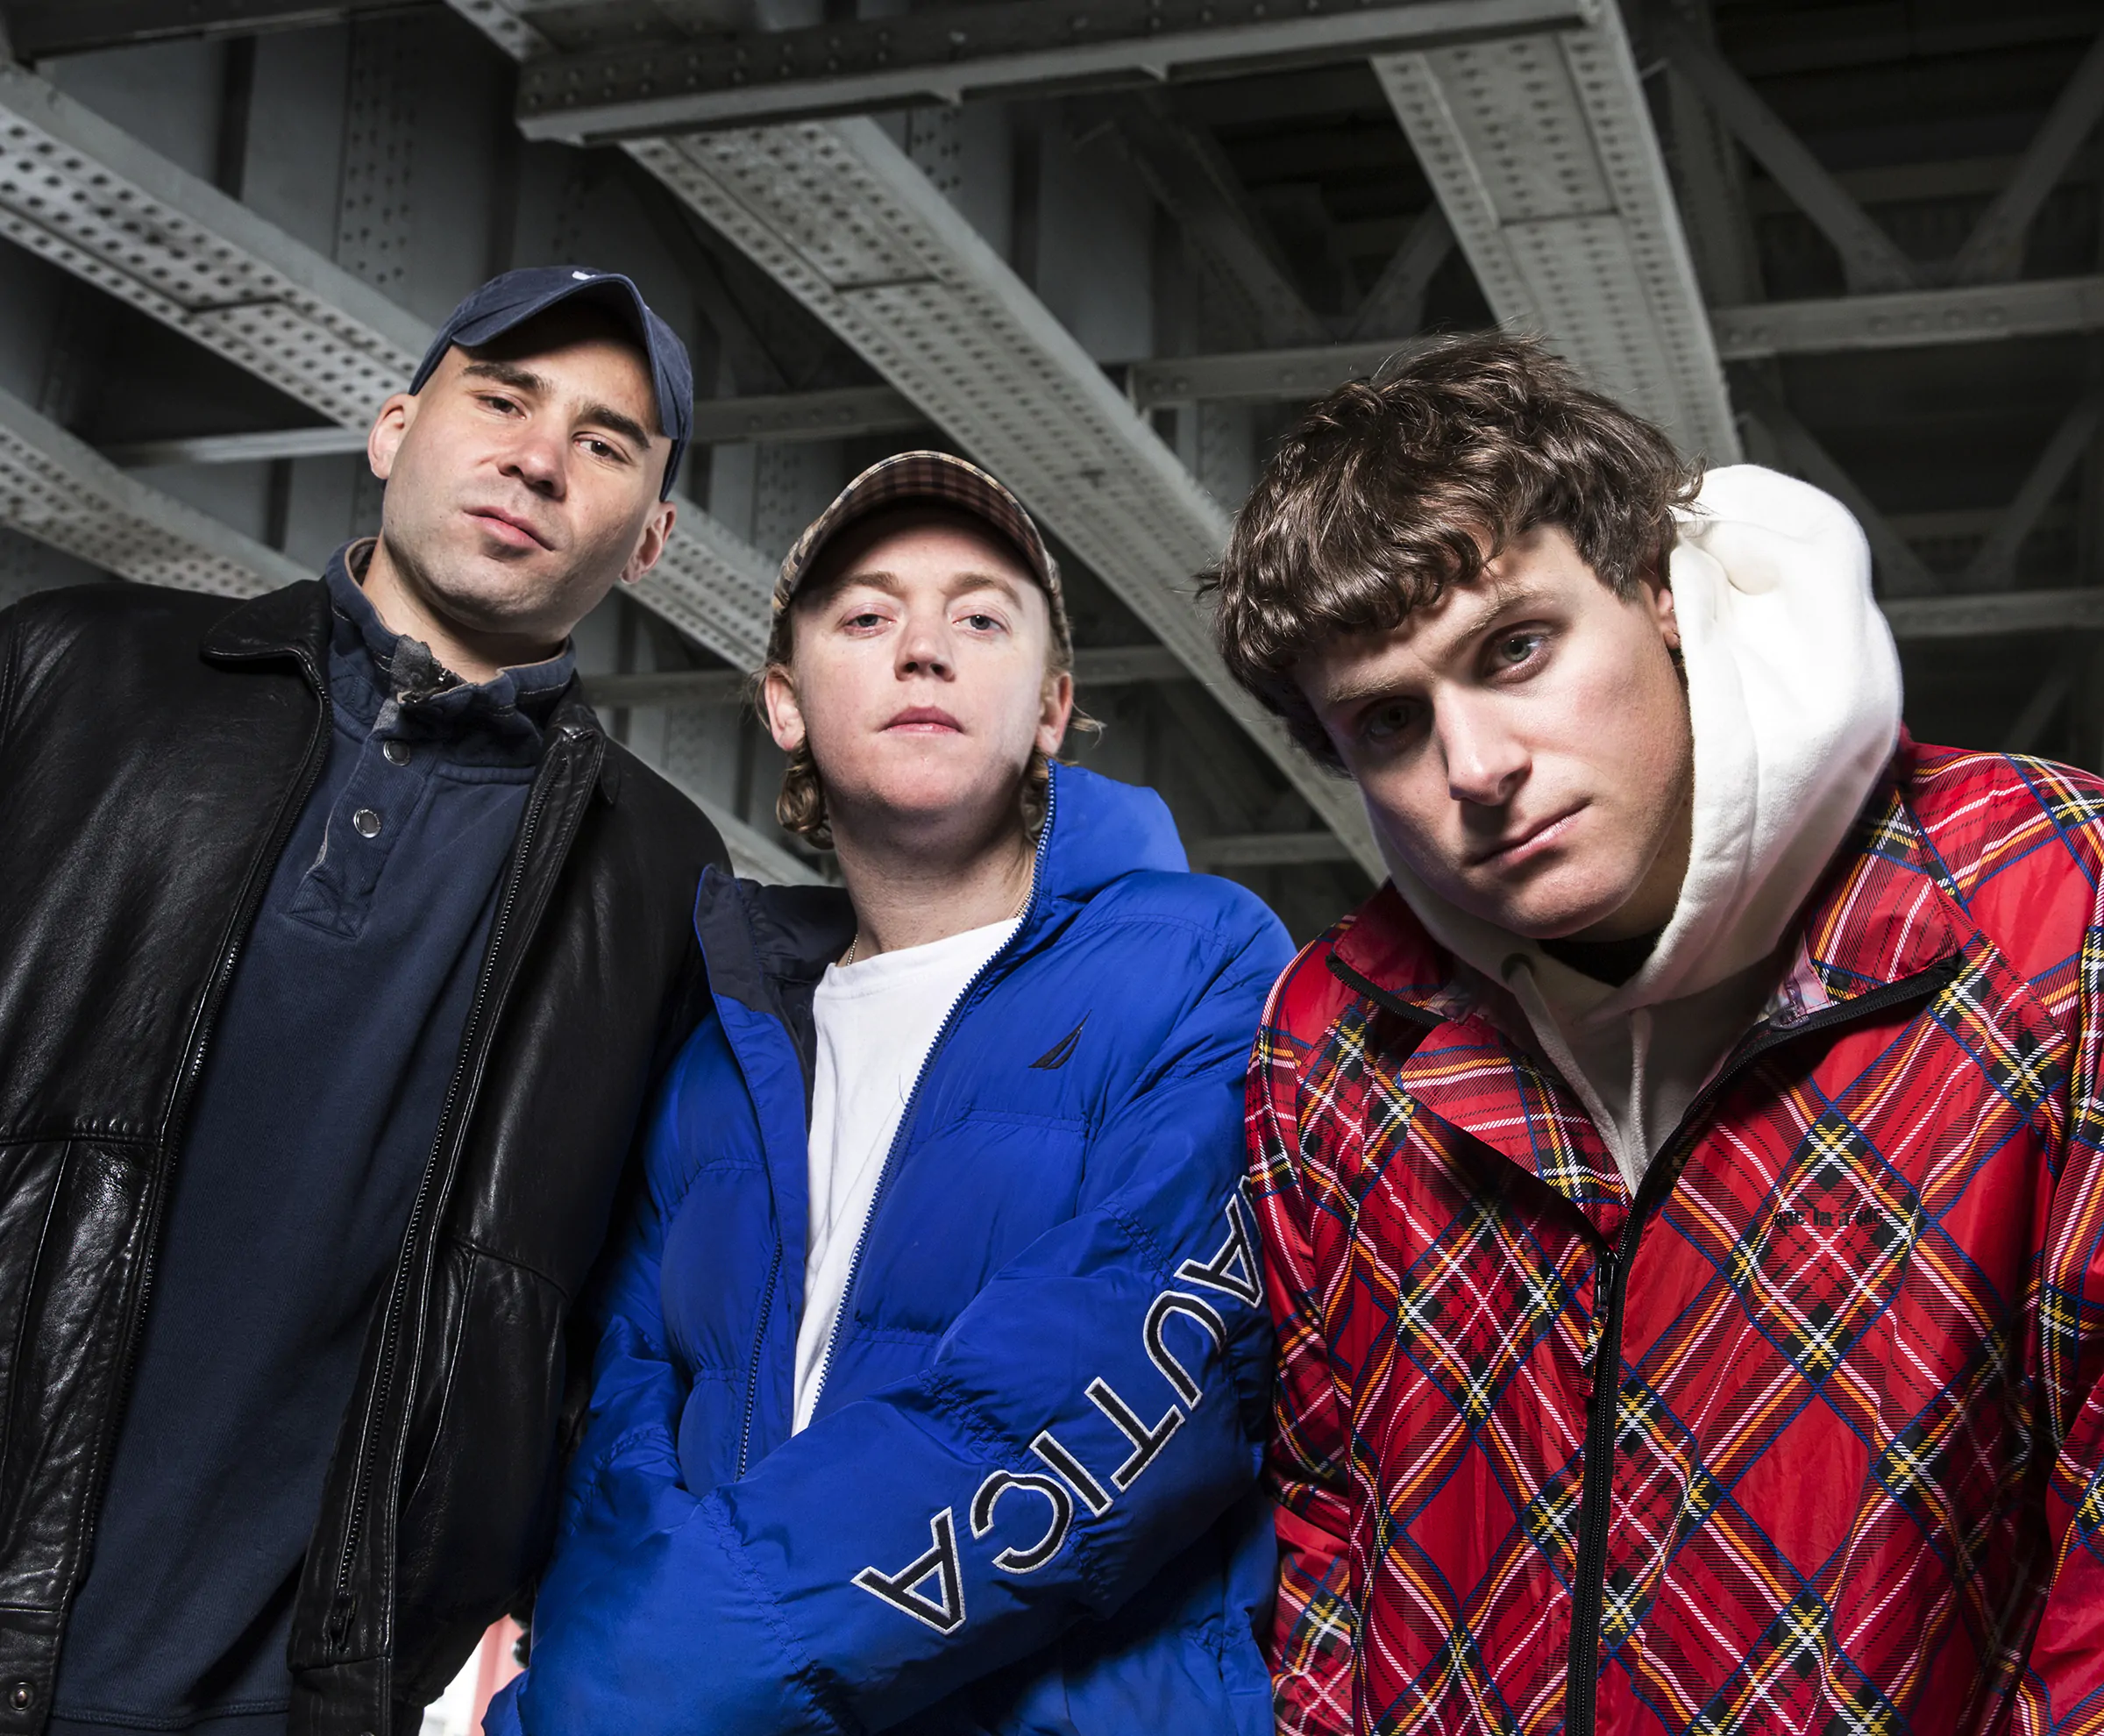 DMA’S release video for ‘Round & Around’ – Watch Now!